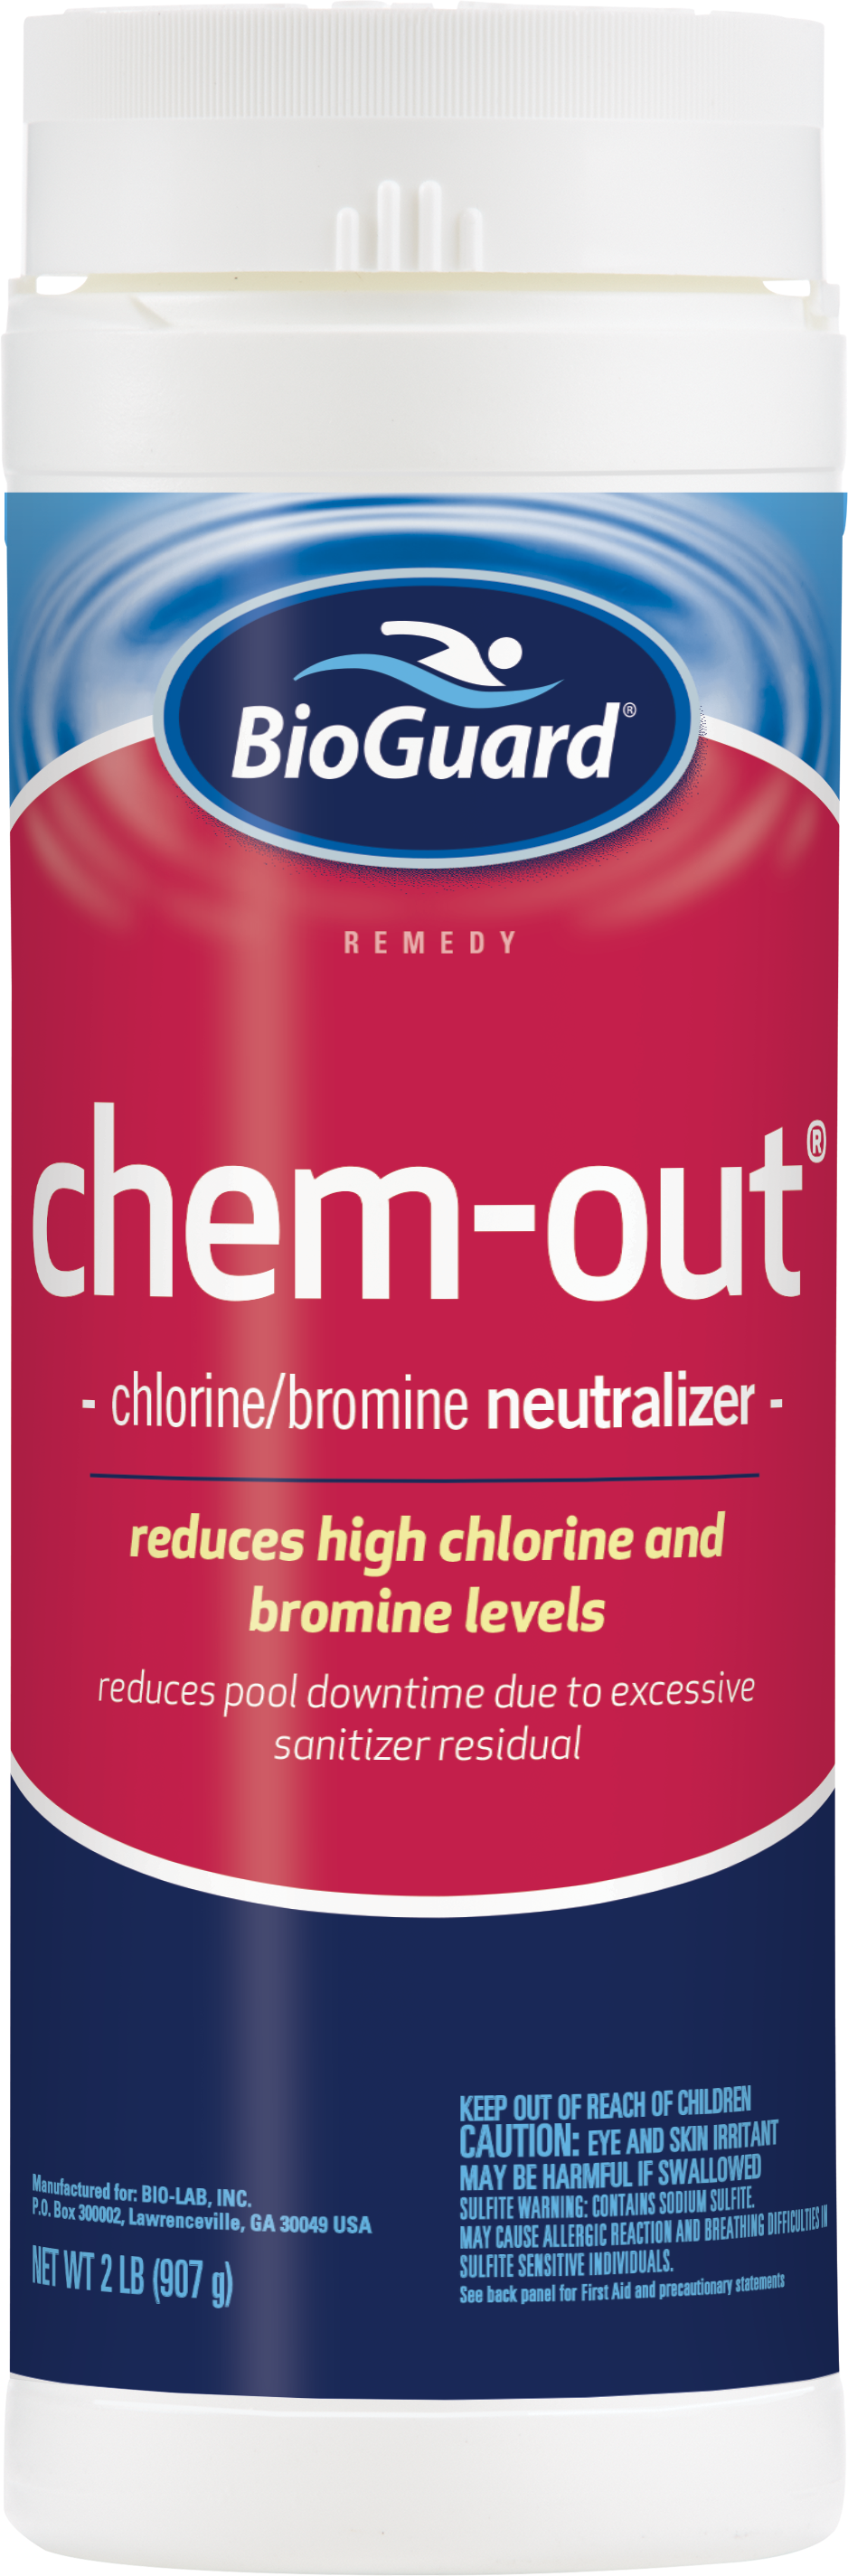 Chem-out Chlorine/ Bromine Neutralizer 2lb